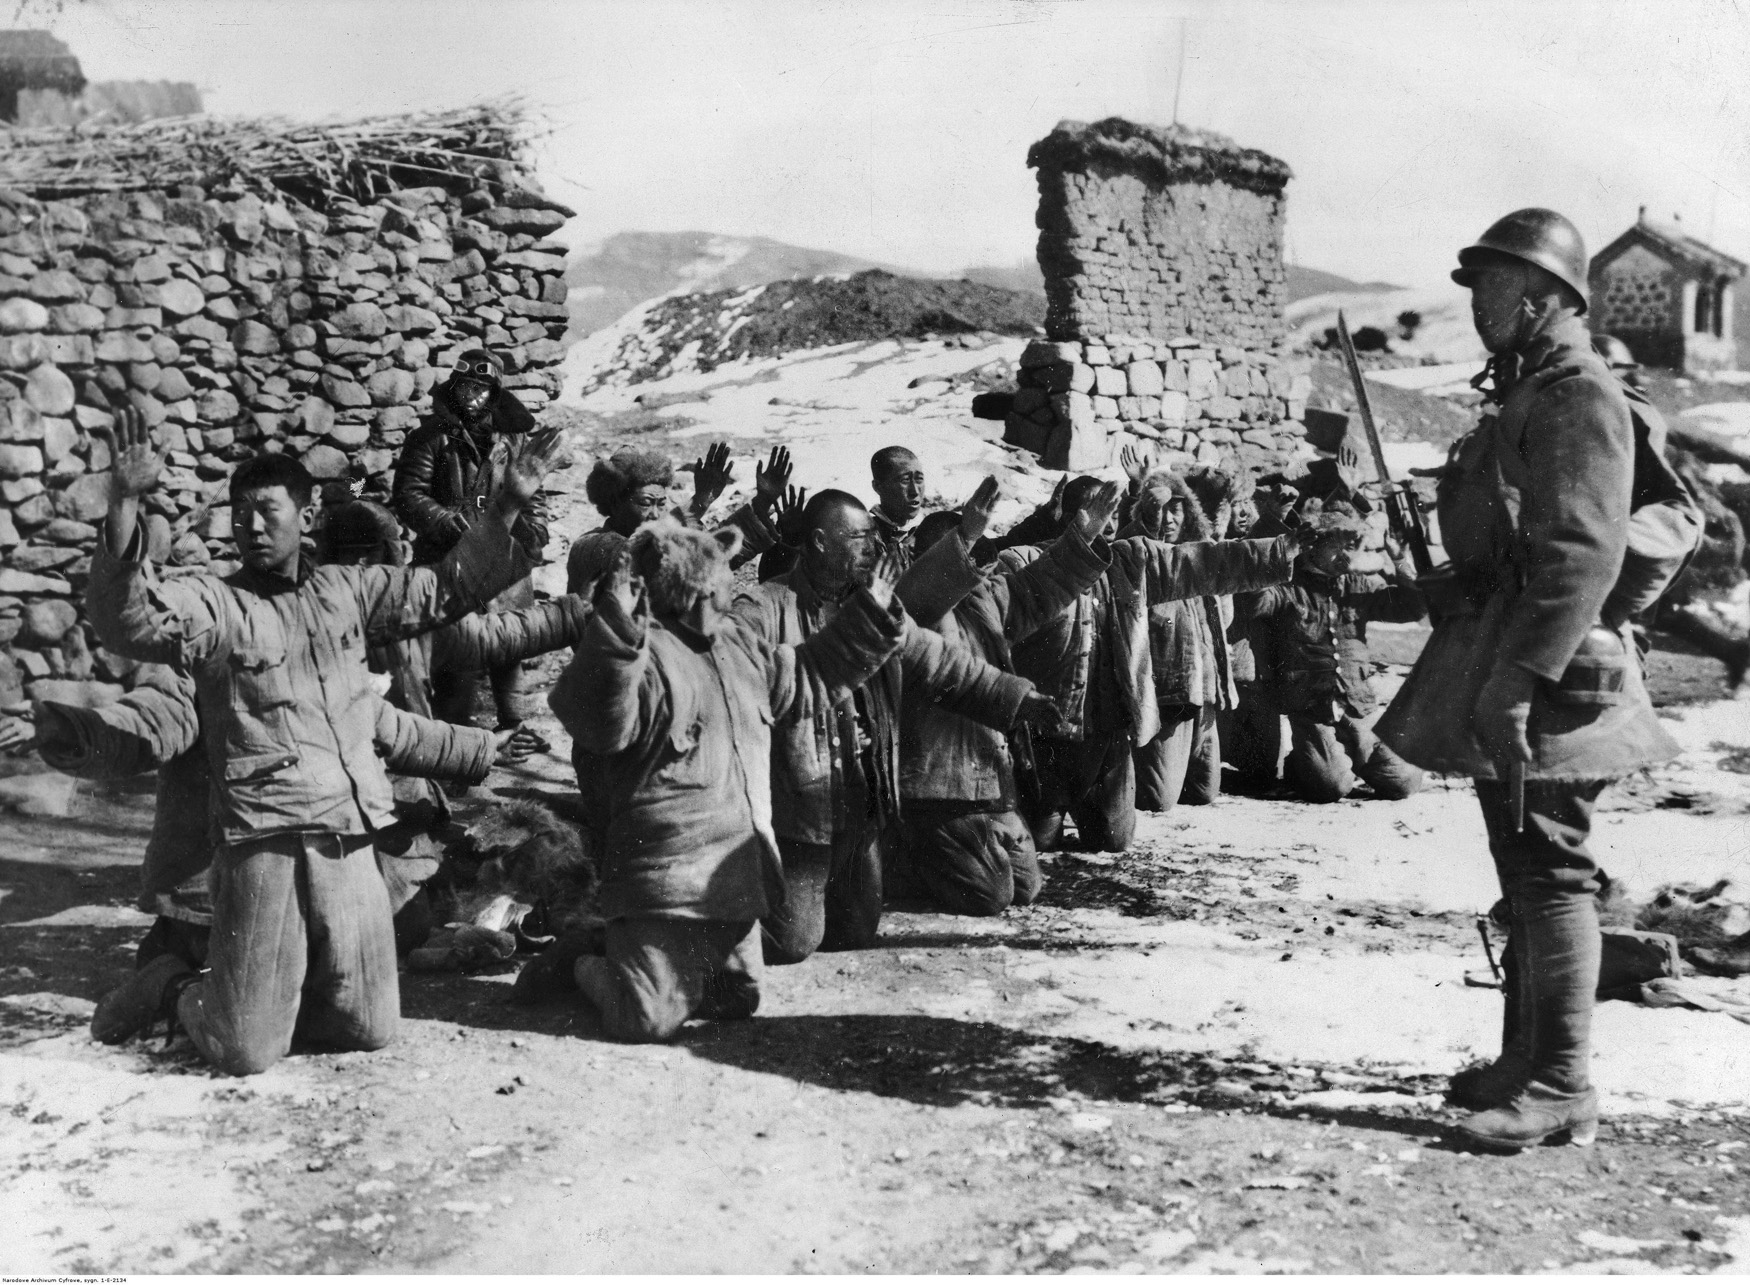 Japanese soldiers guard Chinese prisoners during the invasion of Manchuria, September 1931. Many prisoners of war, as well as civilians, were used as subjects in the horrific experiments. 